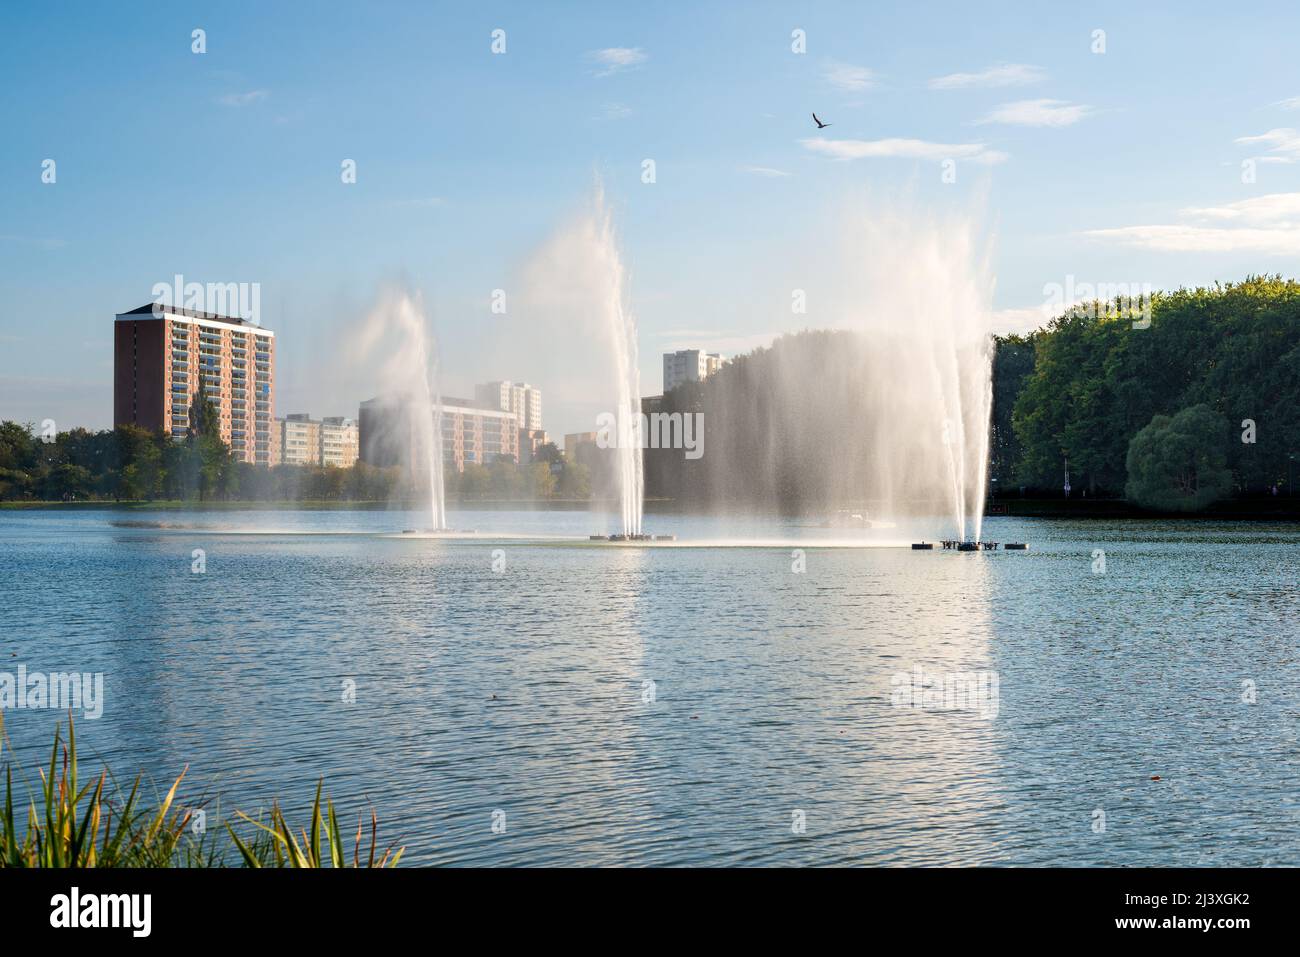 Calm lake in Pildammsparken with three tall fountains with reflection and blue sky in Malmö, Sweden Stock Photo